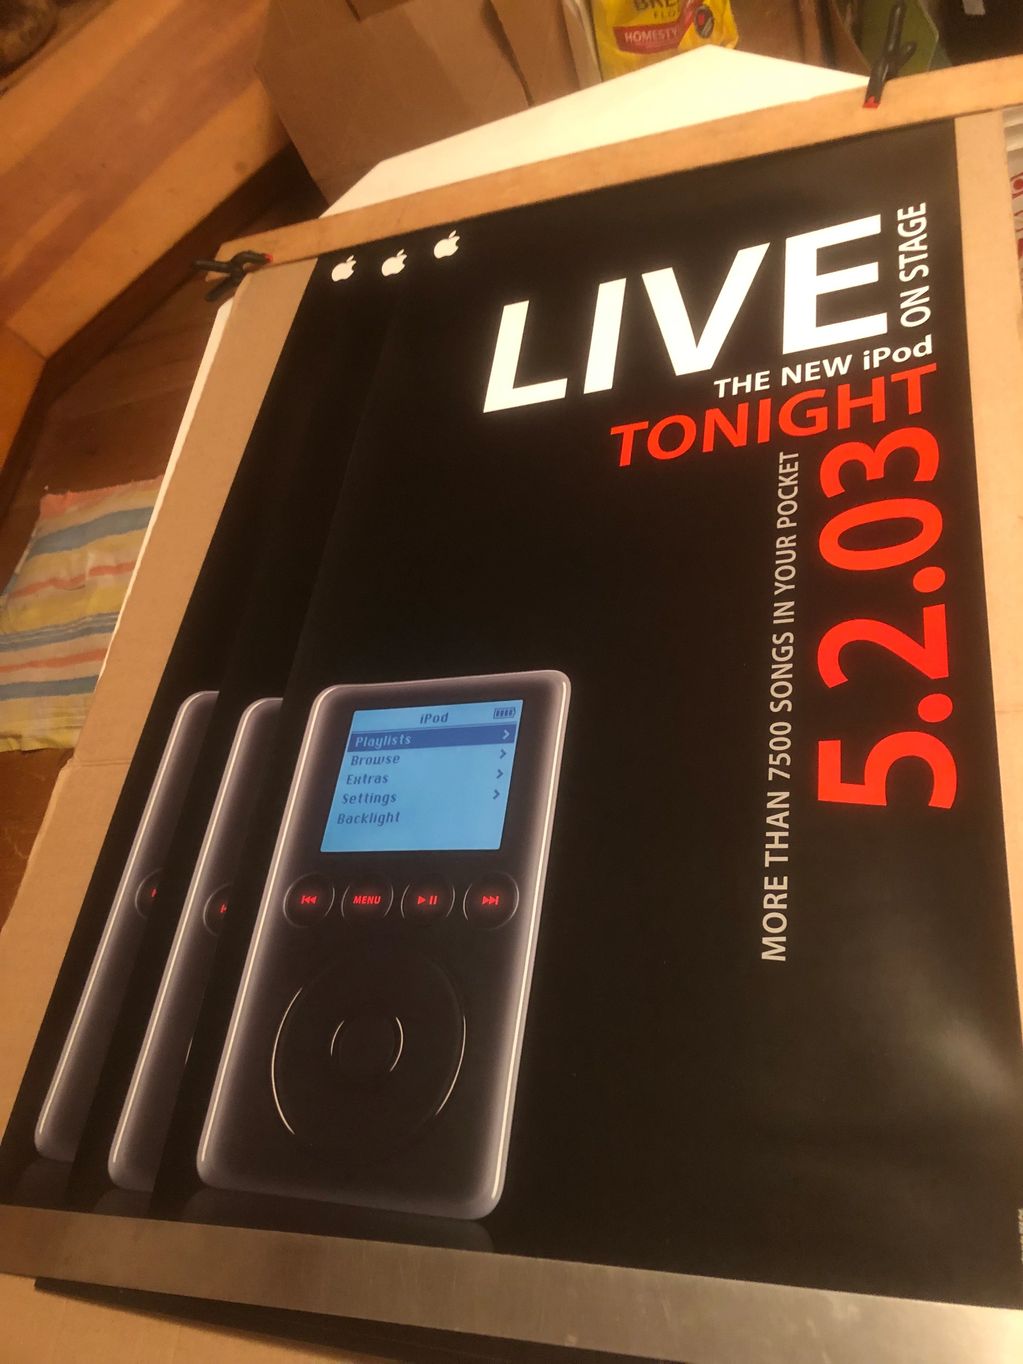 3rd gen iPod launch "Live On Stage" poster